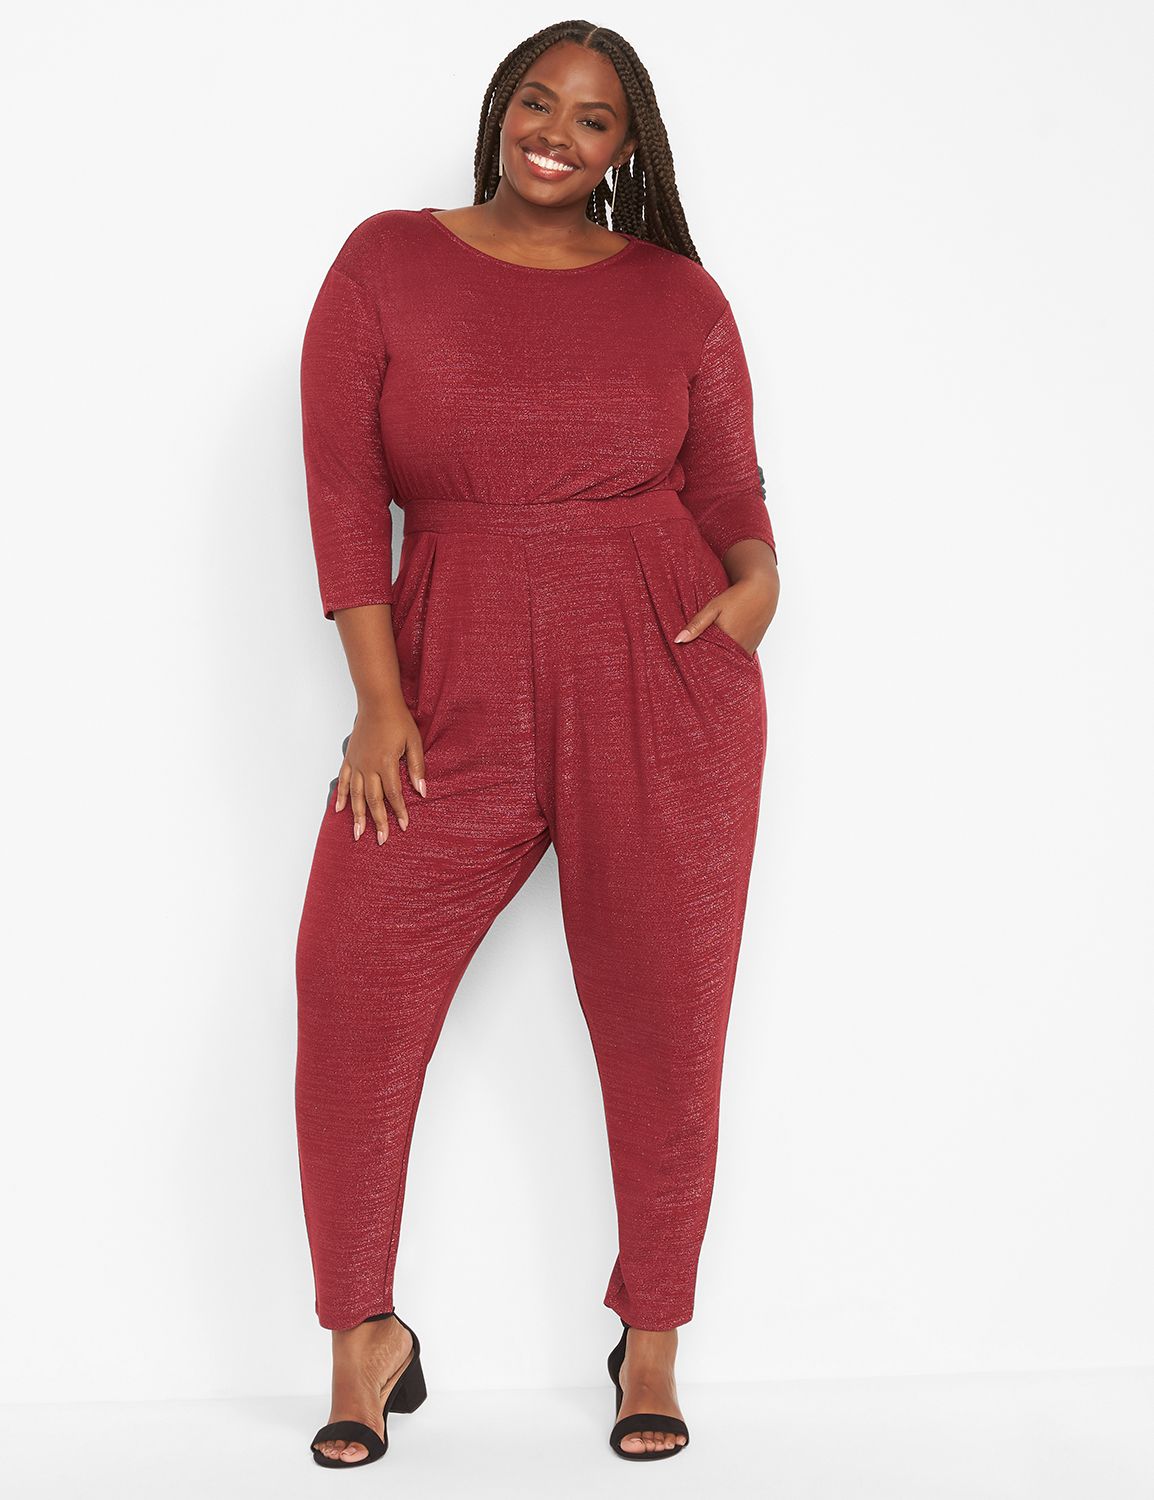 Due Overlevelse der ovre Clearance Plus Size Clothing - On Sale Today | Lane Bryant